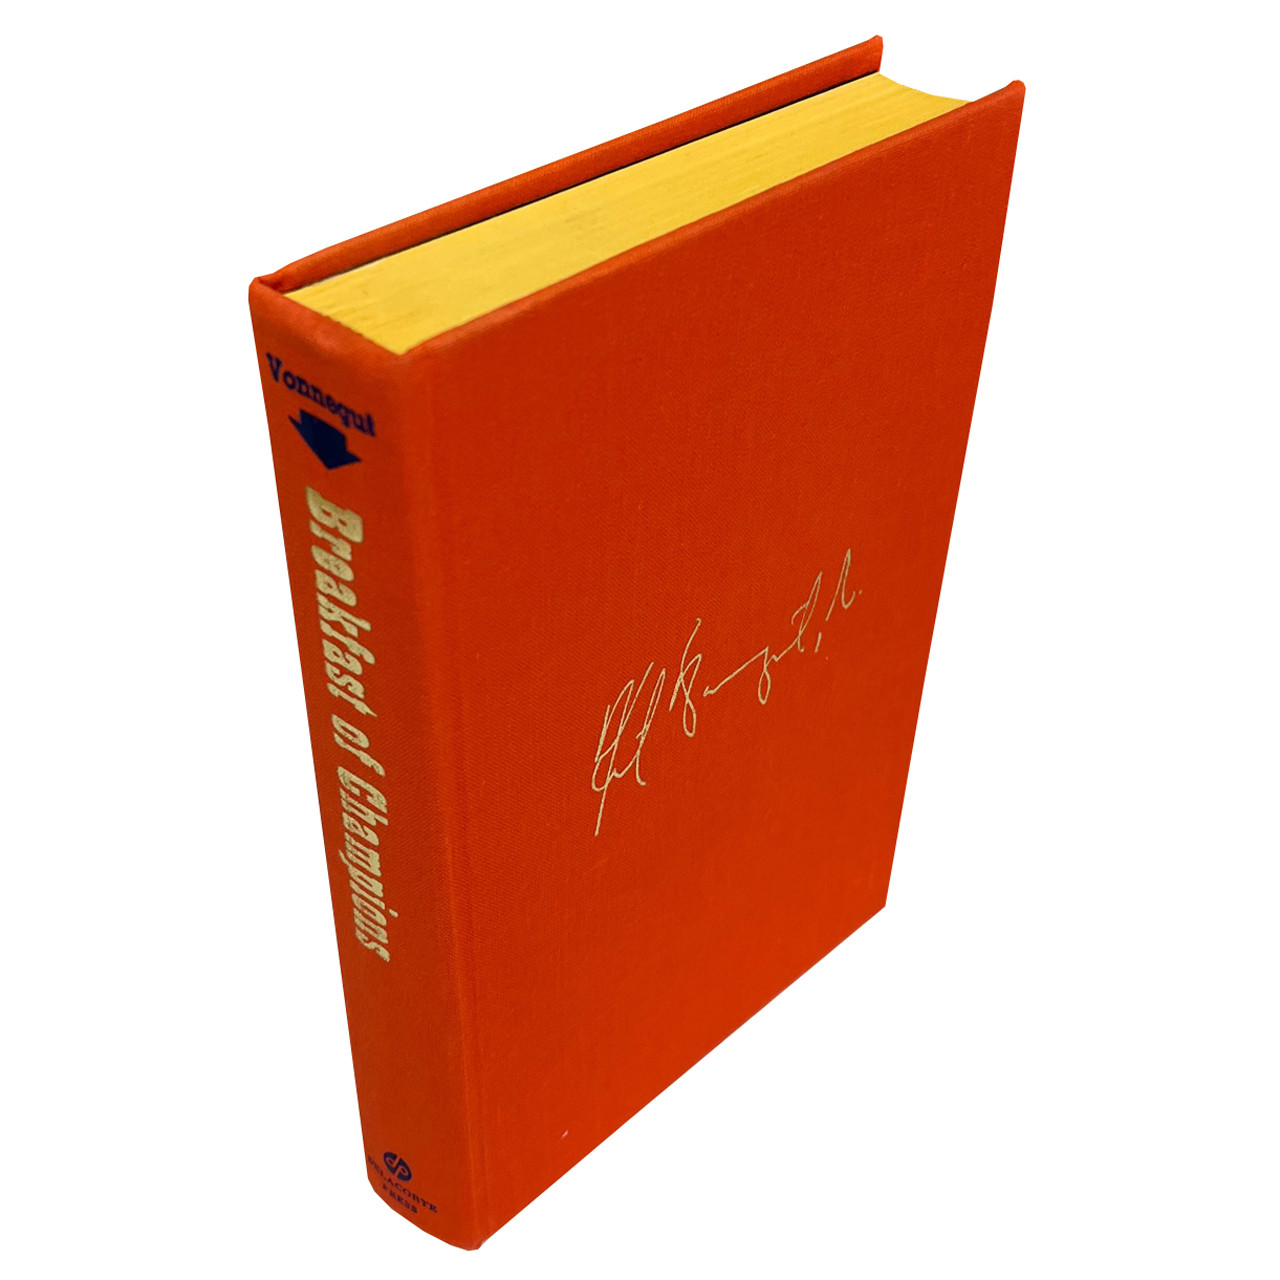 Kurt Vonnegut "Breakfast of Champions" Tray-cased Signed First Edition, First Printing w/COA